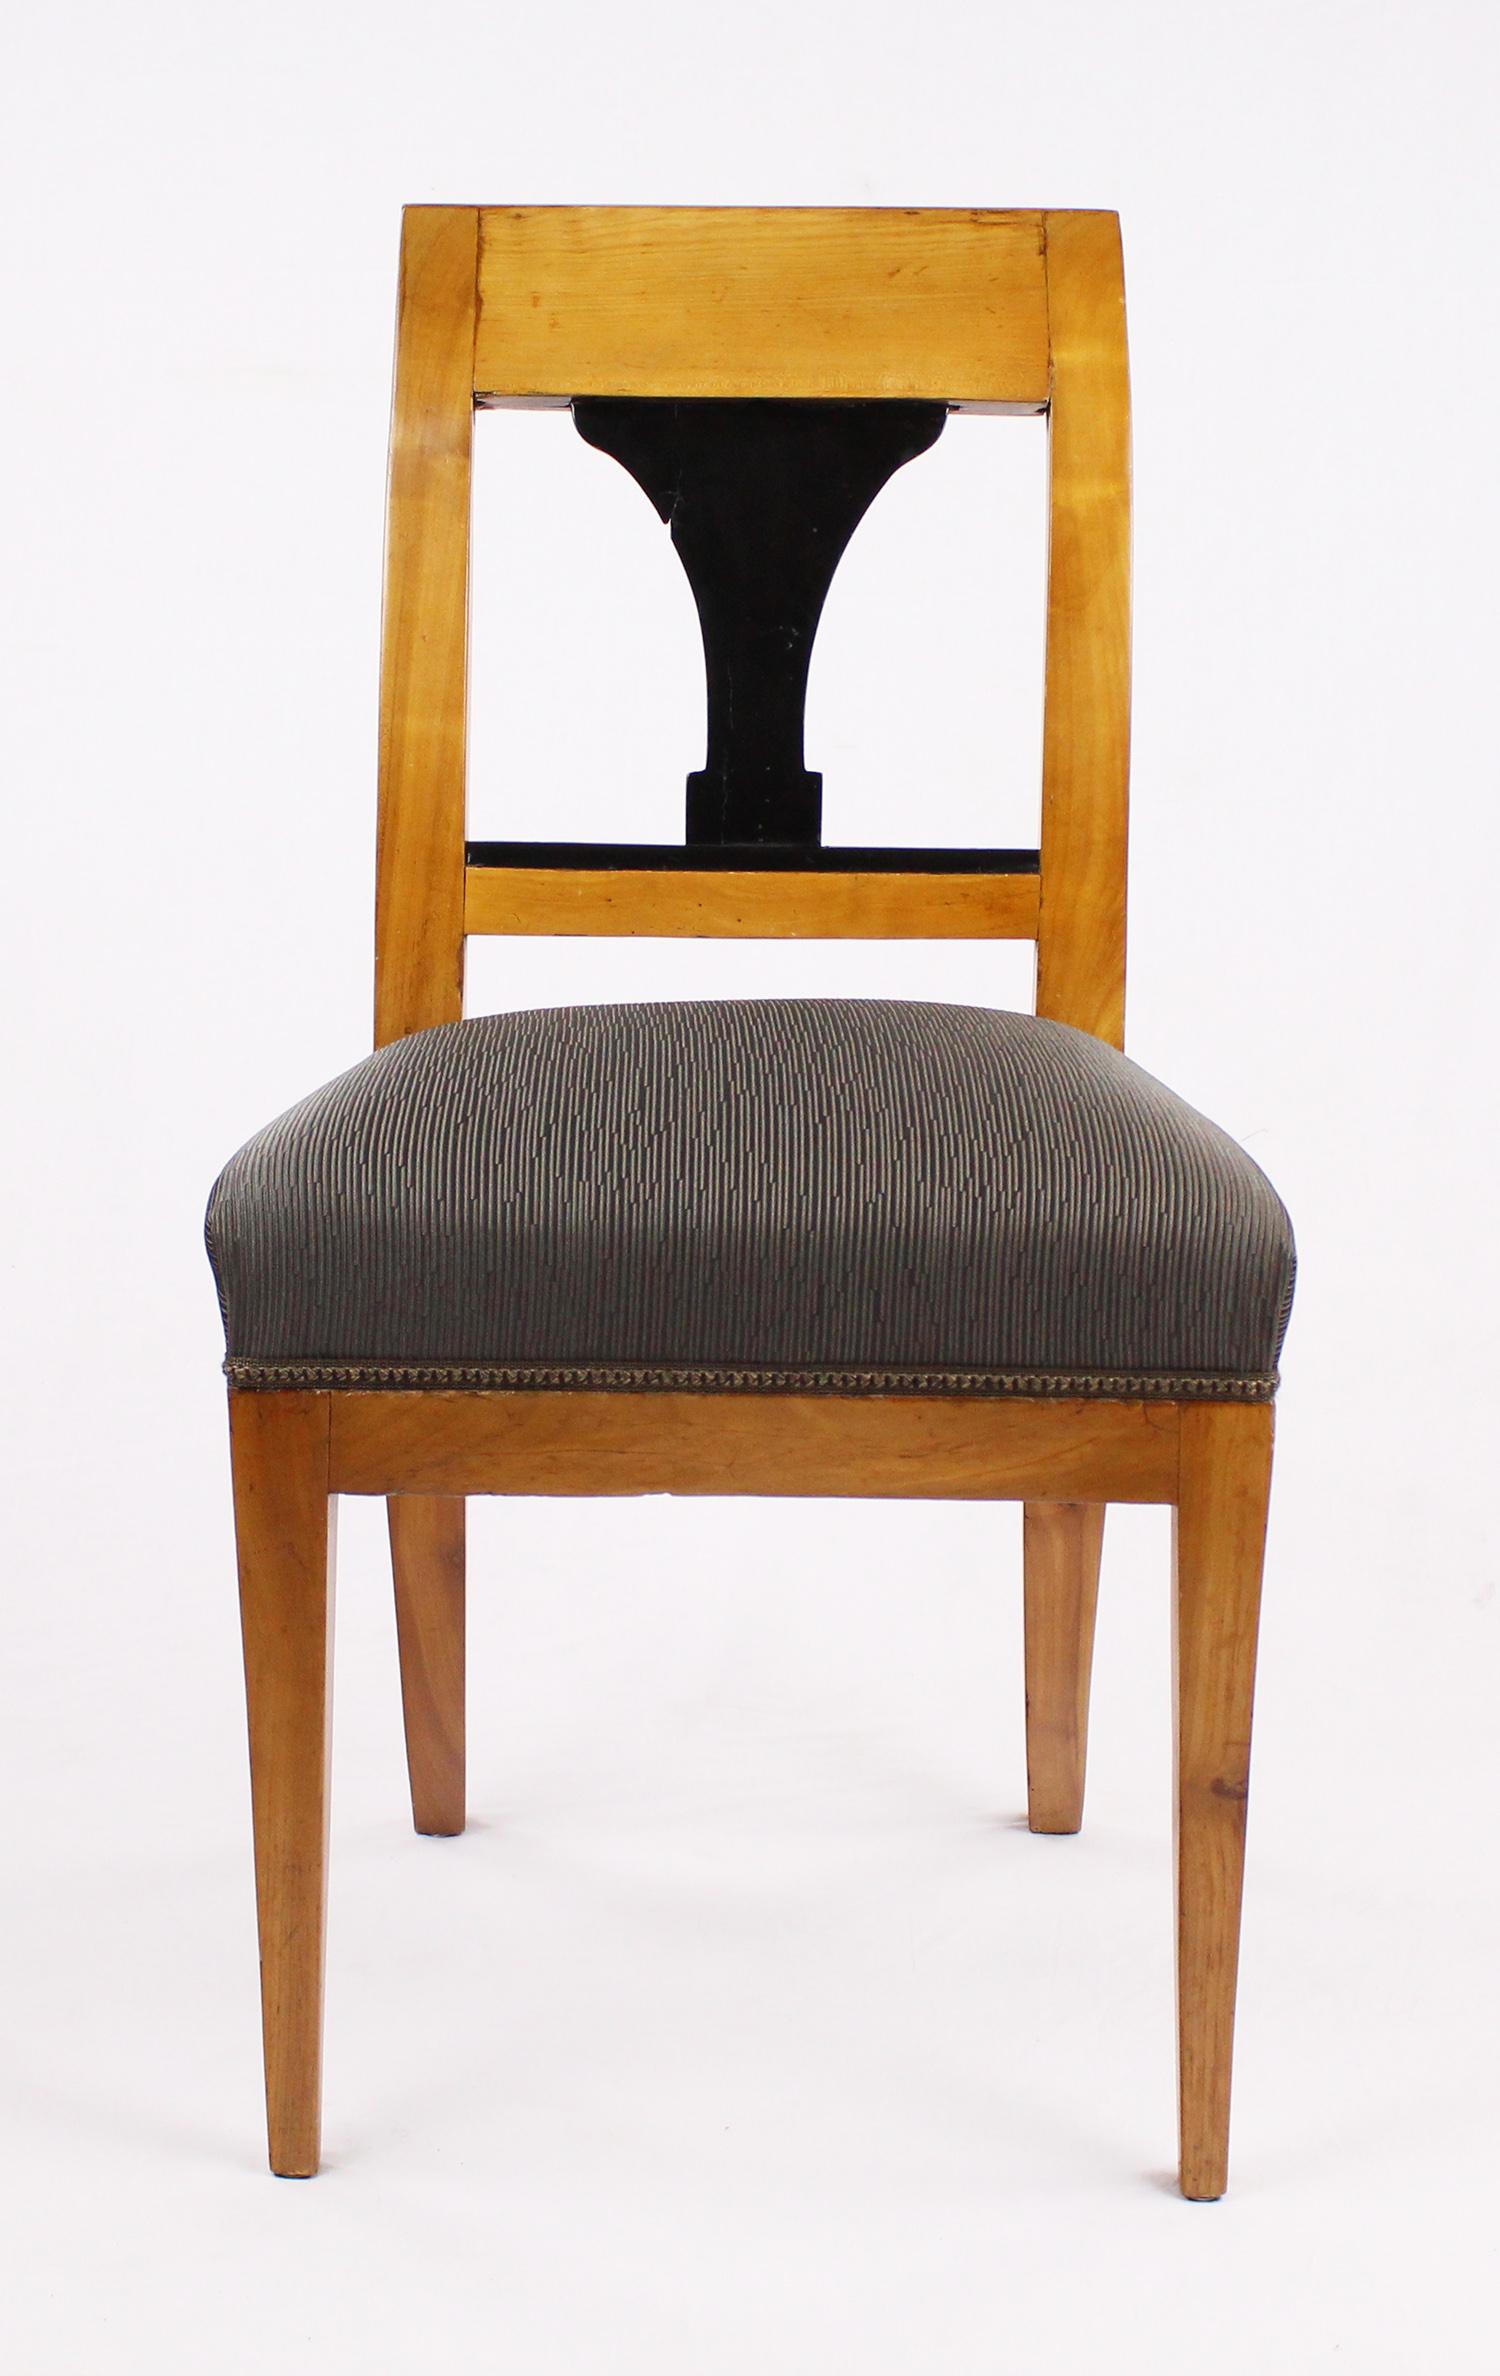 Biedermeier chair, massive cherrywood, partly ebonized.

I dispatch by air in safe wood boxes only. So no need to worry about the shipment. Delivery can be made within 10-14 days worldwide. We already delivered to Asia, US and a lot of European